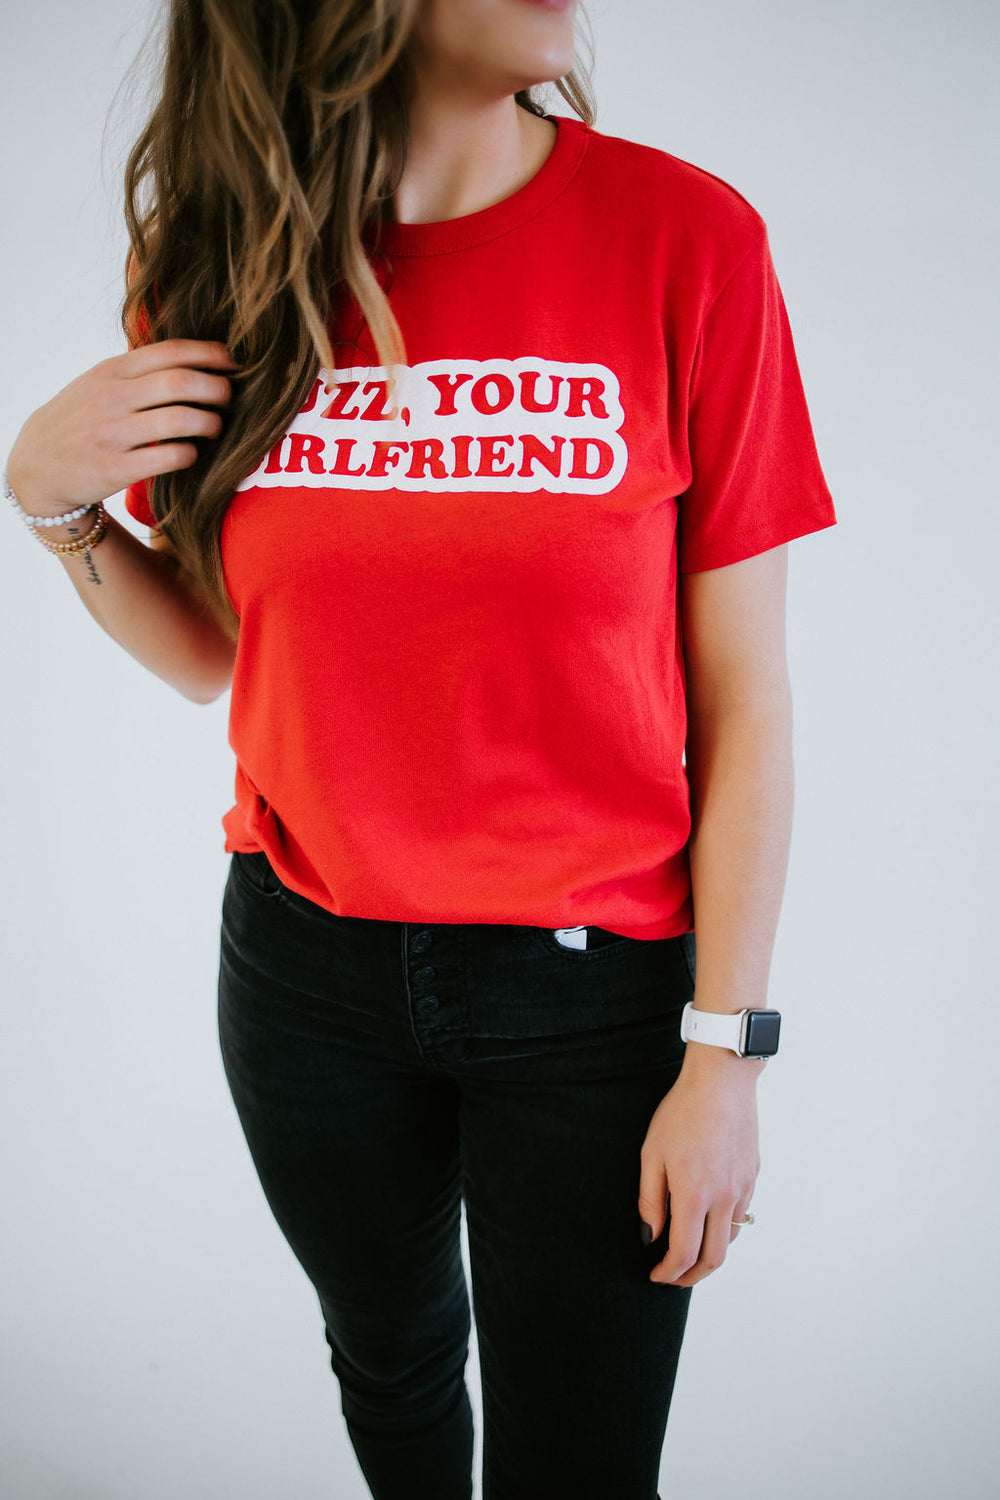 Buzz, Your Girlfriend Graphic Tee FINAL SALE